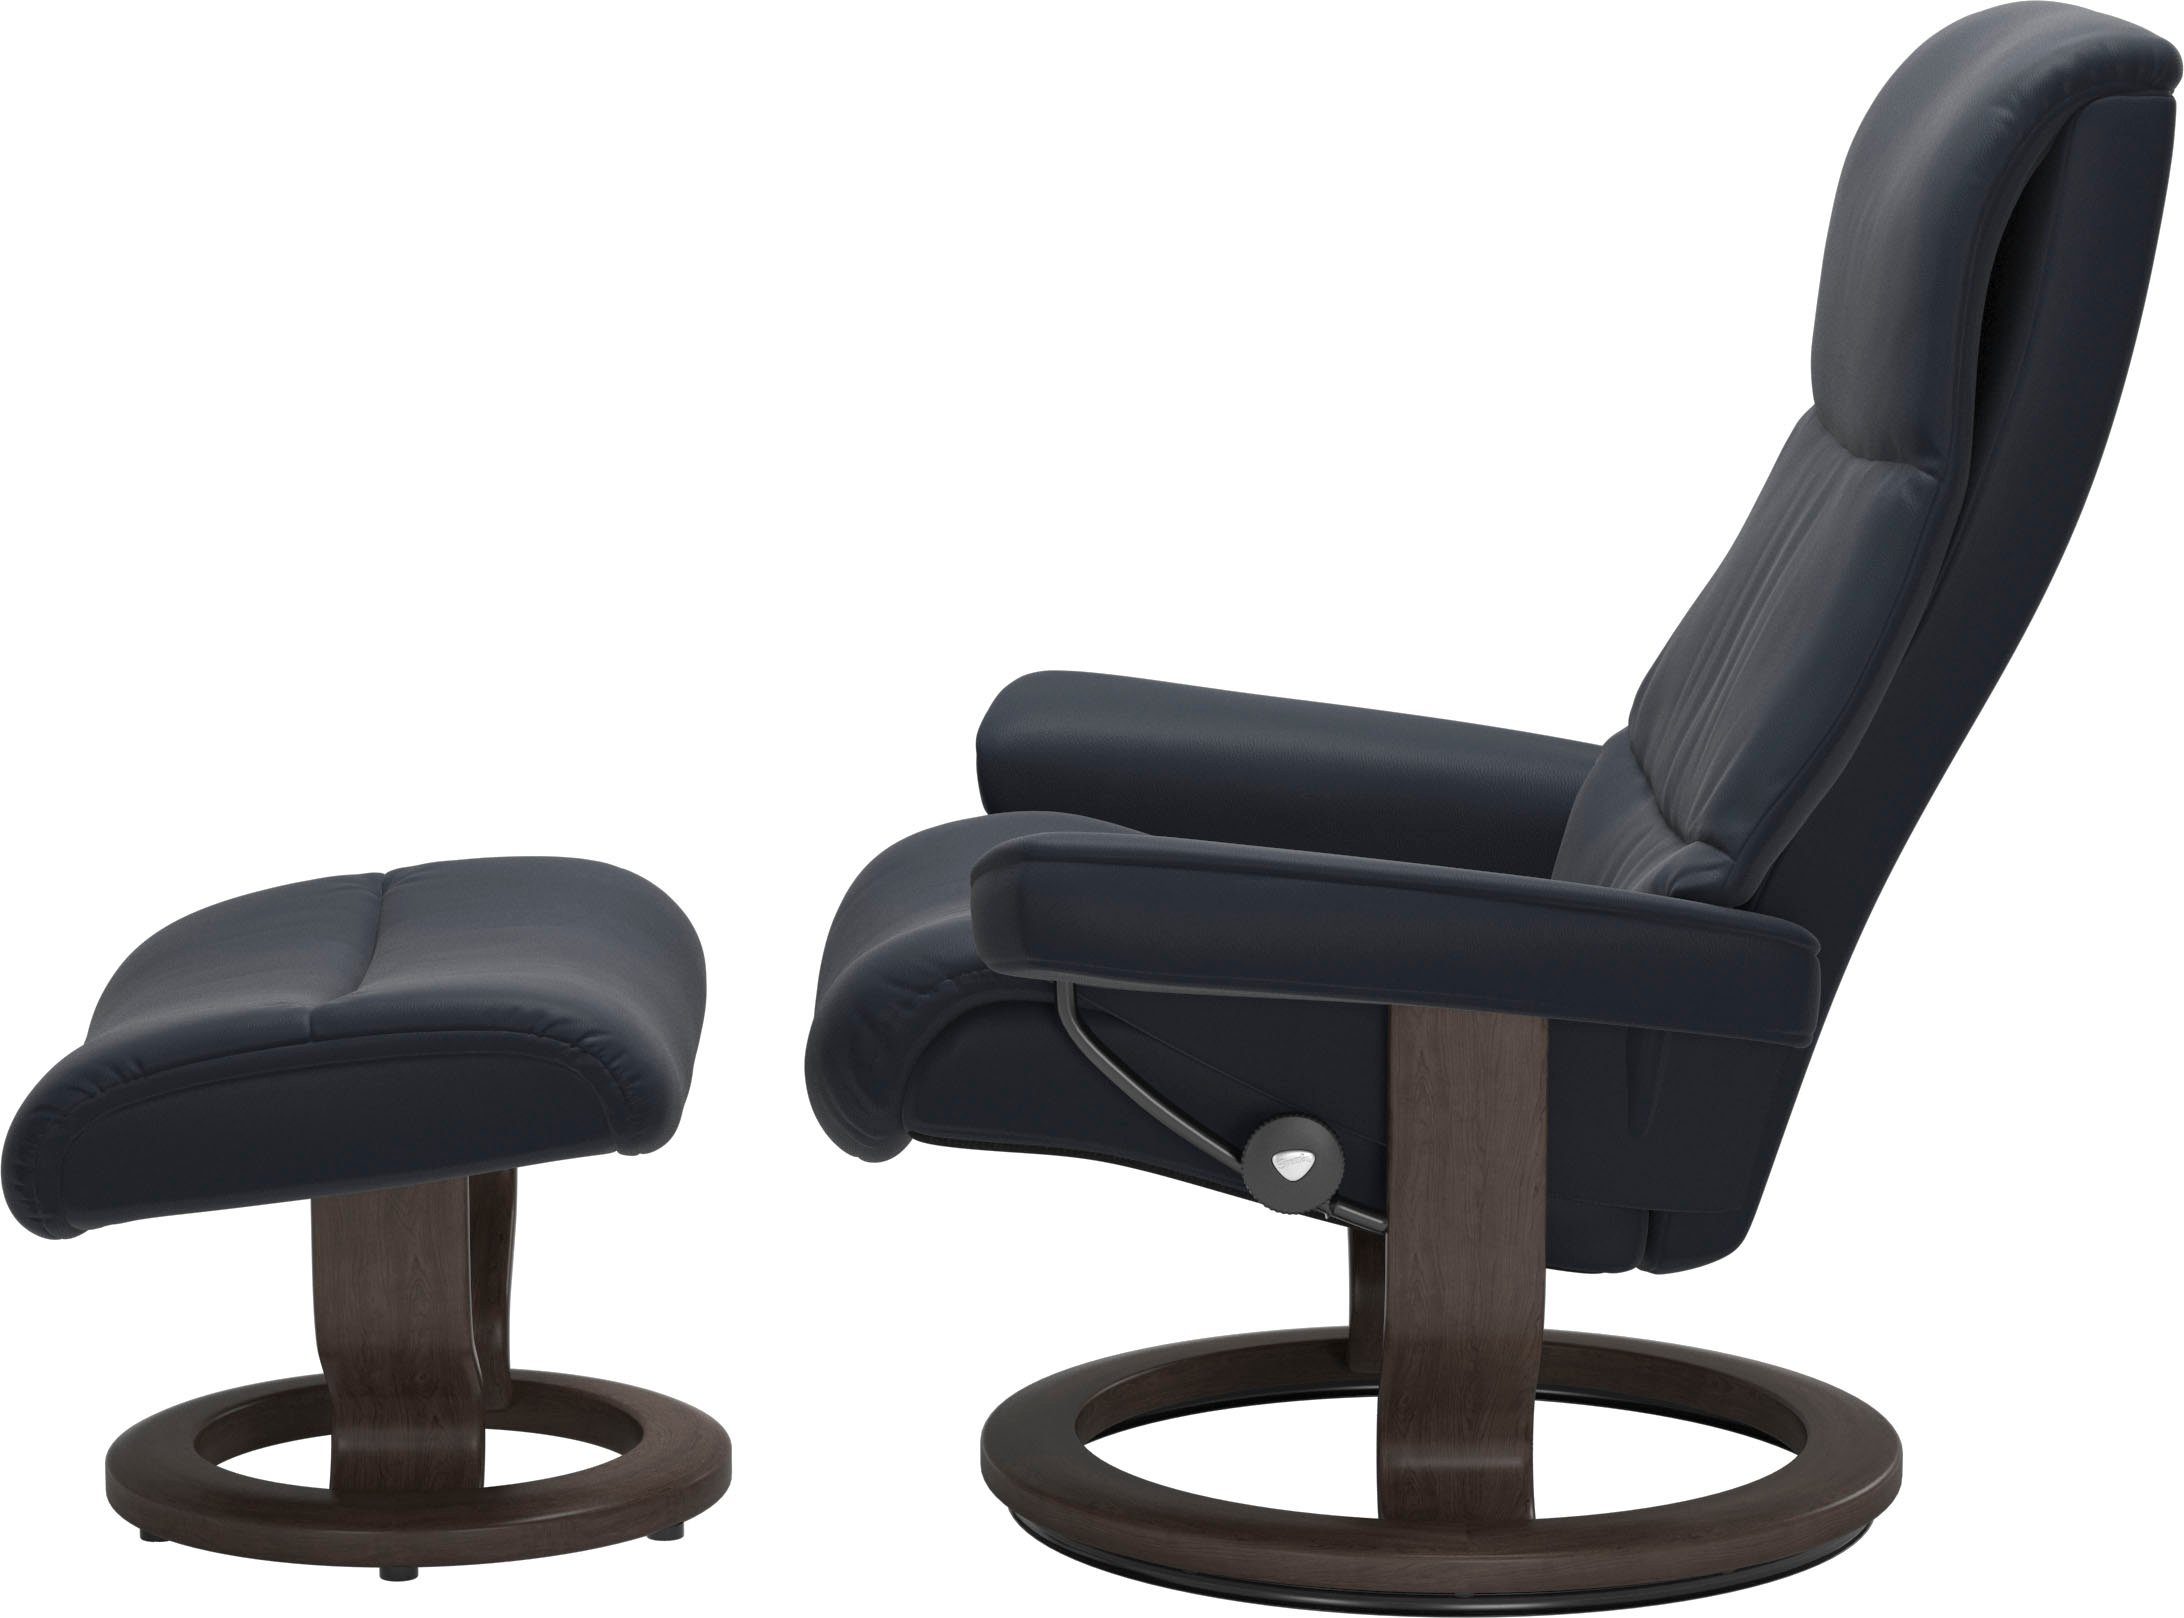 Base, Relaxsessel Wenge Stressless® mit Größe View, S,Gestell Classic